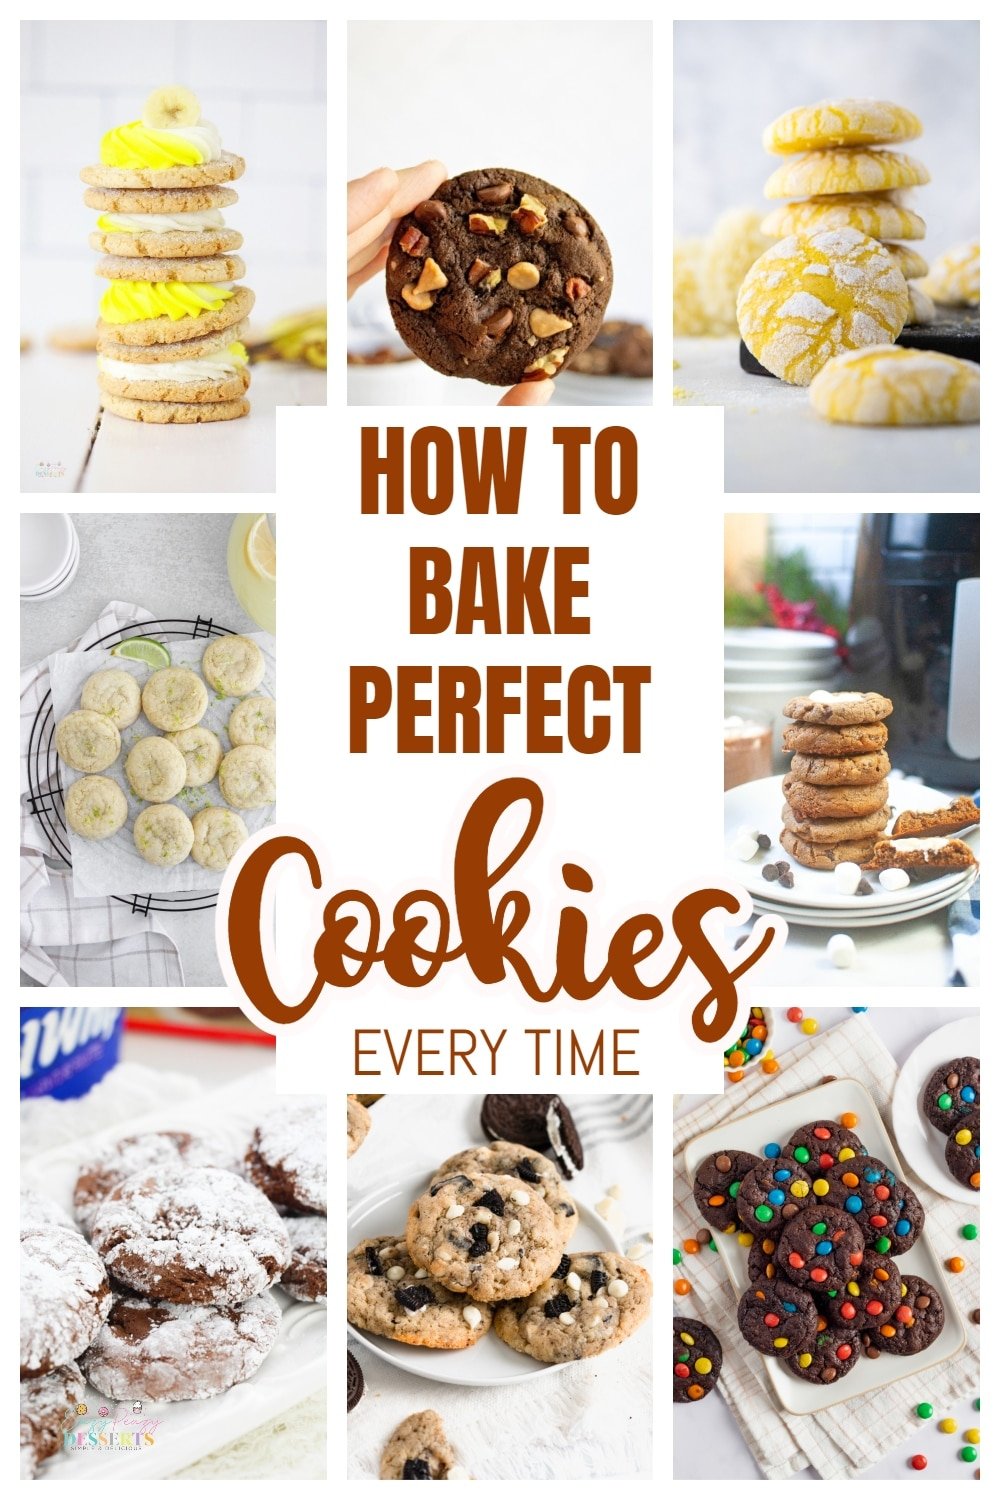 Tips for baking cookies